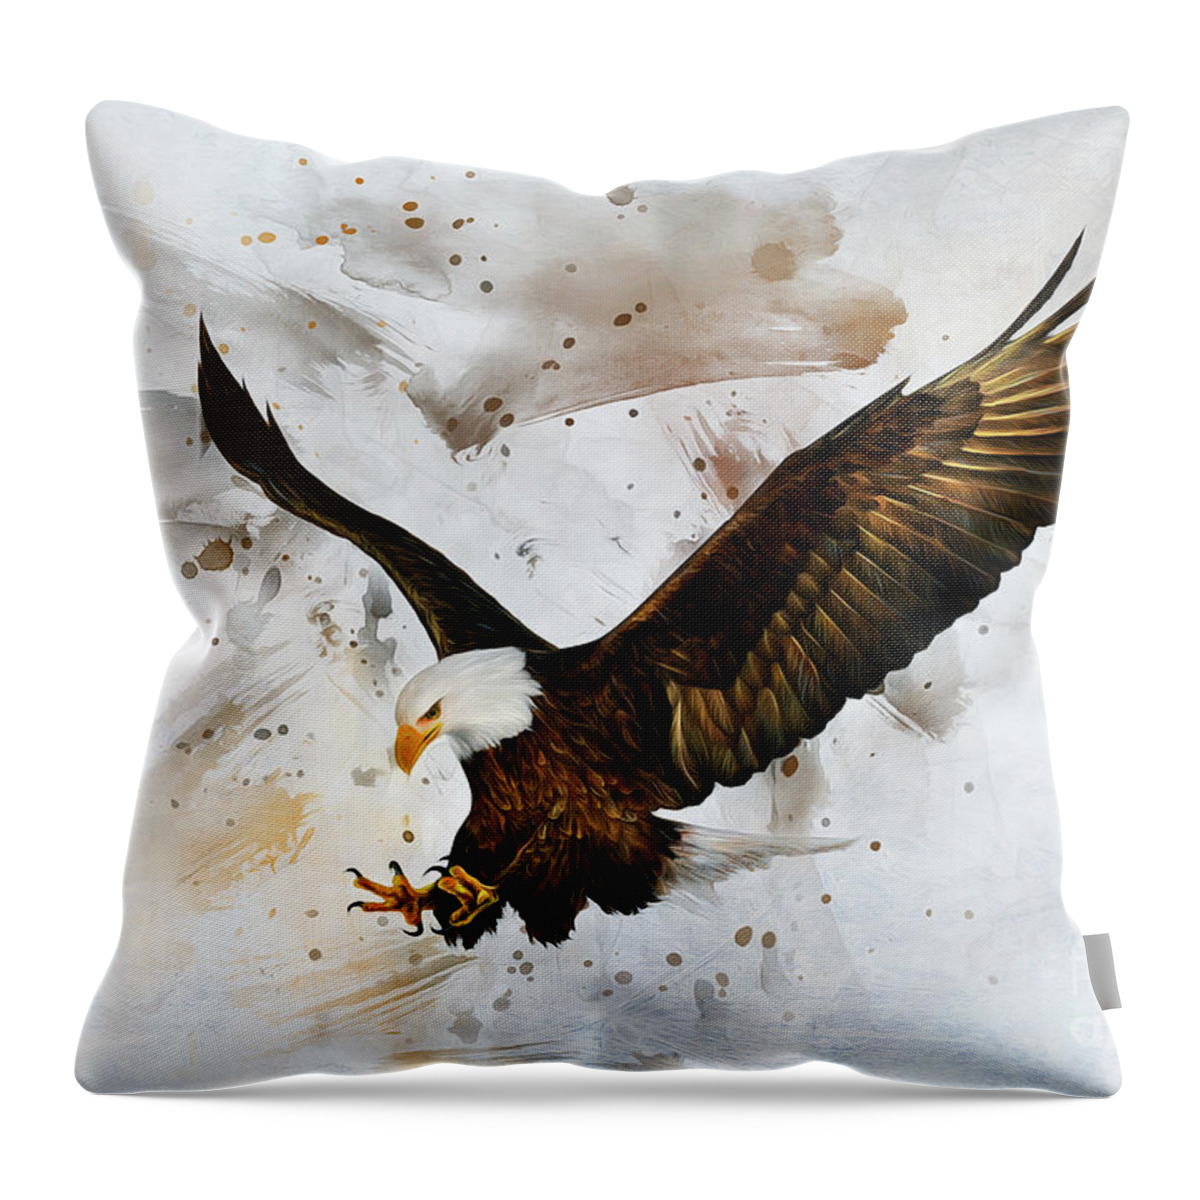 Bird Throw Pillow featuring the digital art Voice of The Eagle by Ian Mitchell